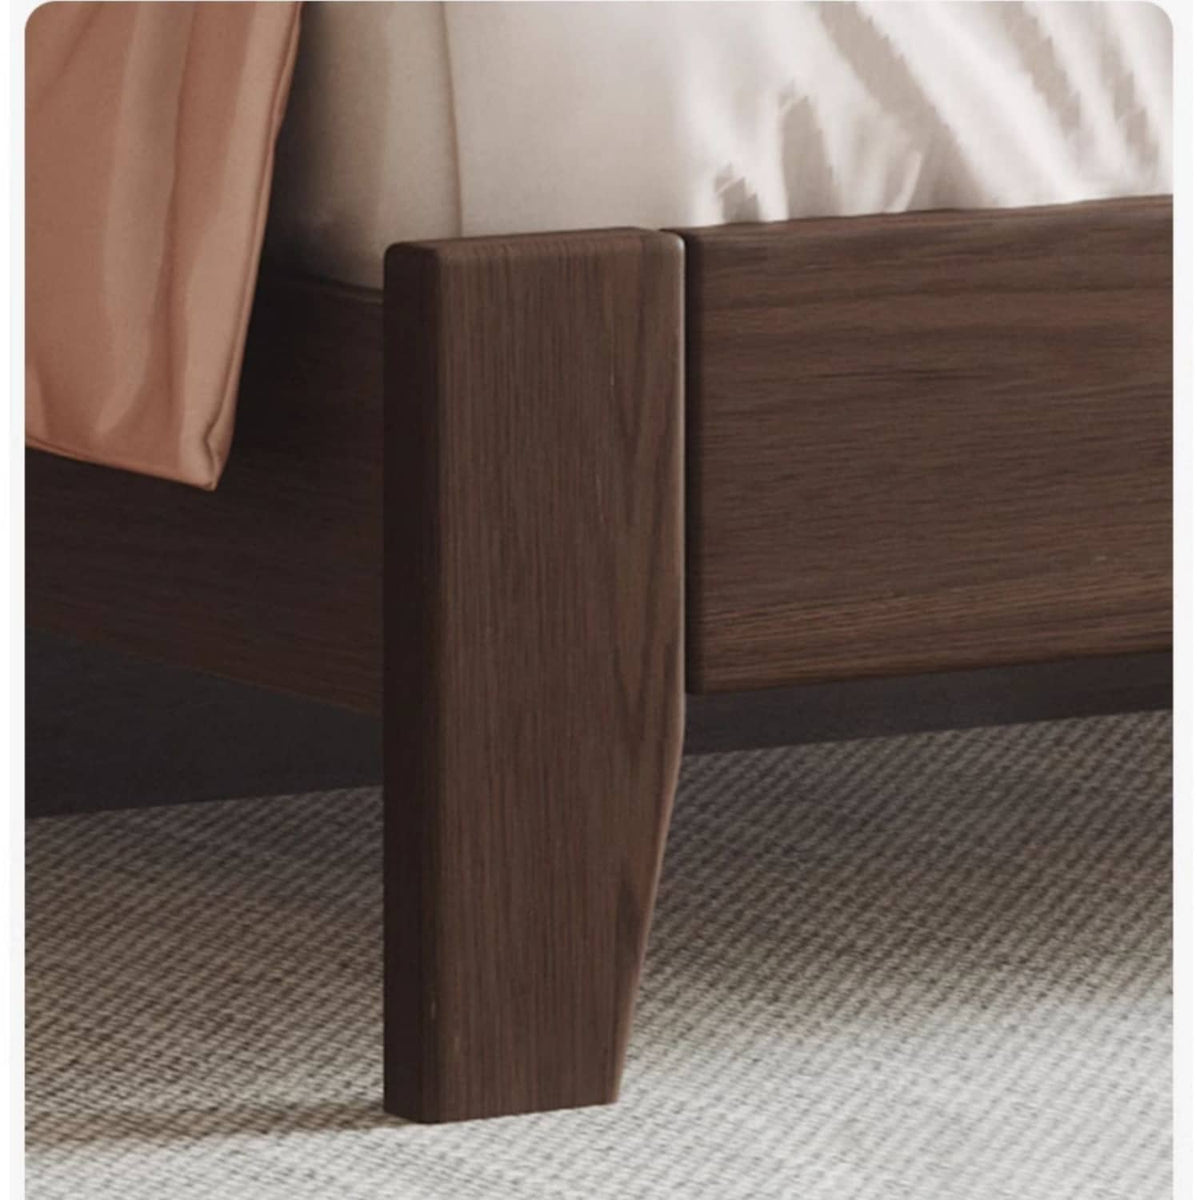 Luxurious Solid Brown Rubberwood Pine Bed Frame - Stylish & Durable Design hmak-236